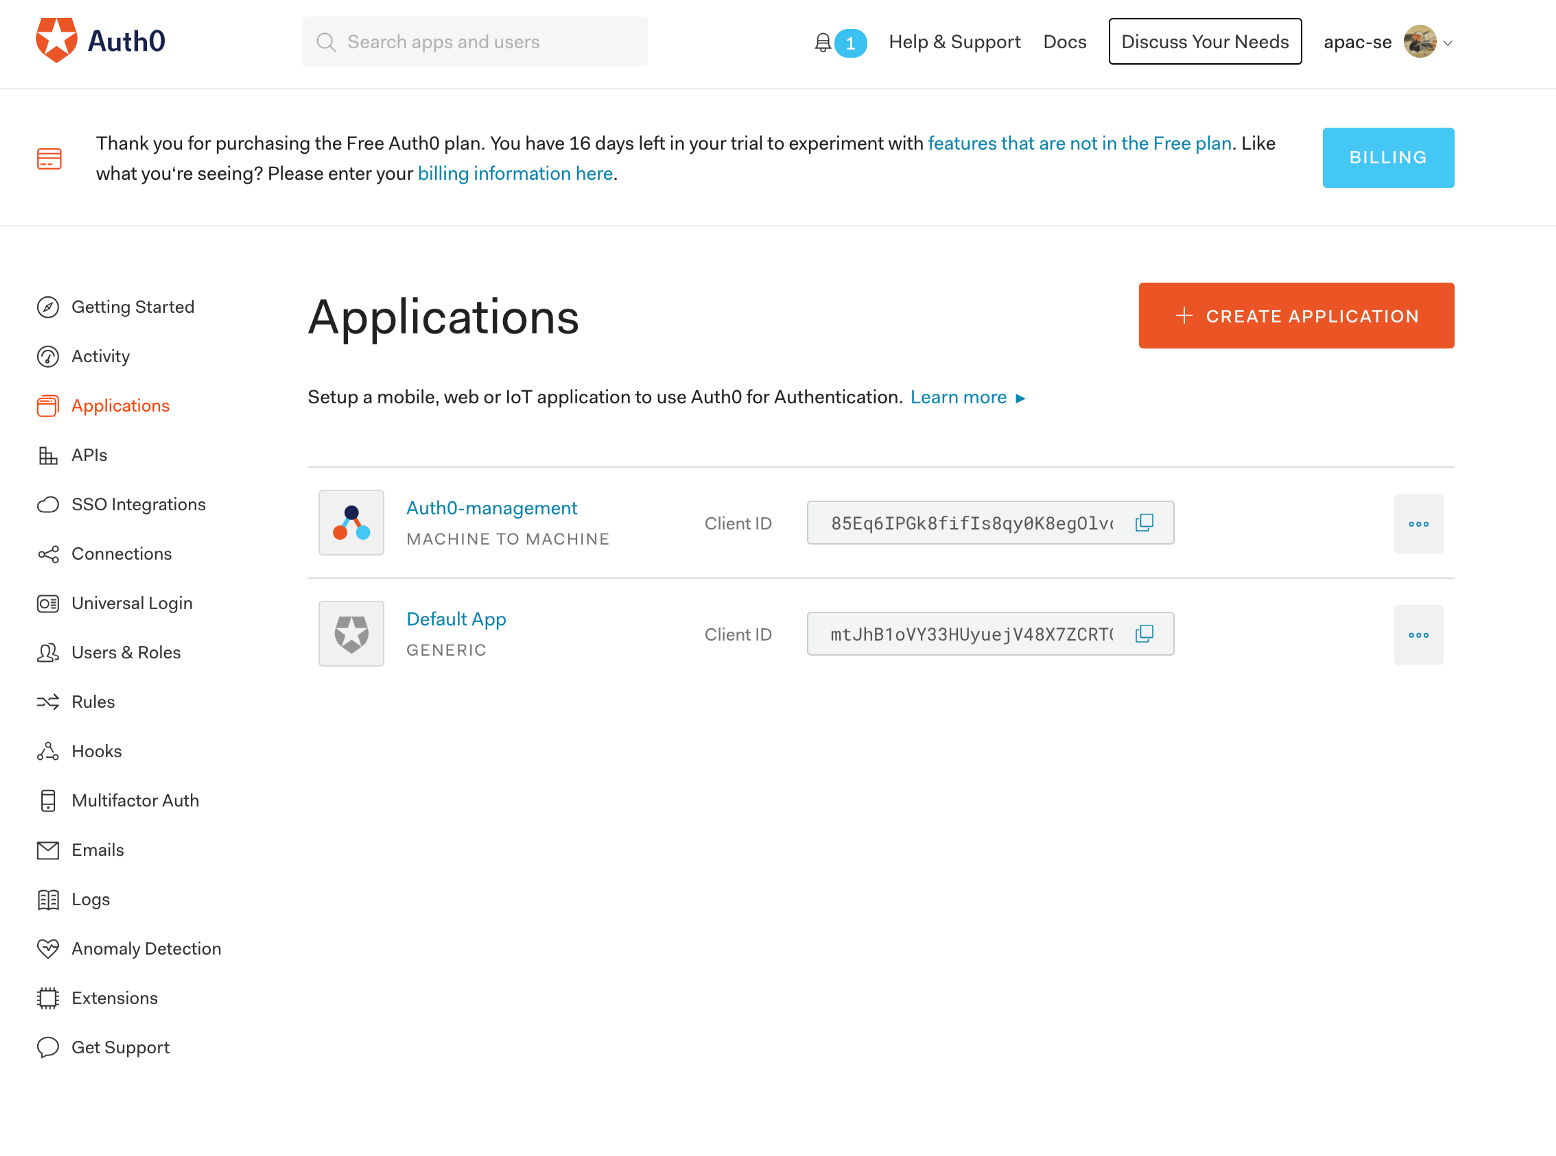 Create a new app in Auth0